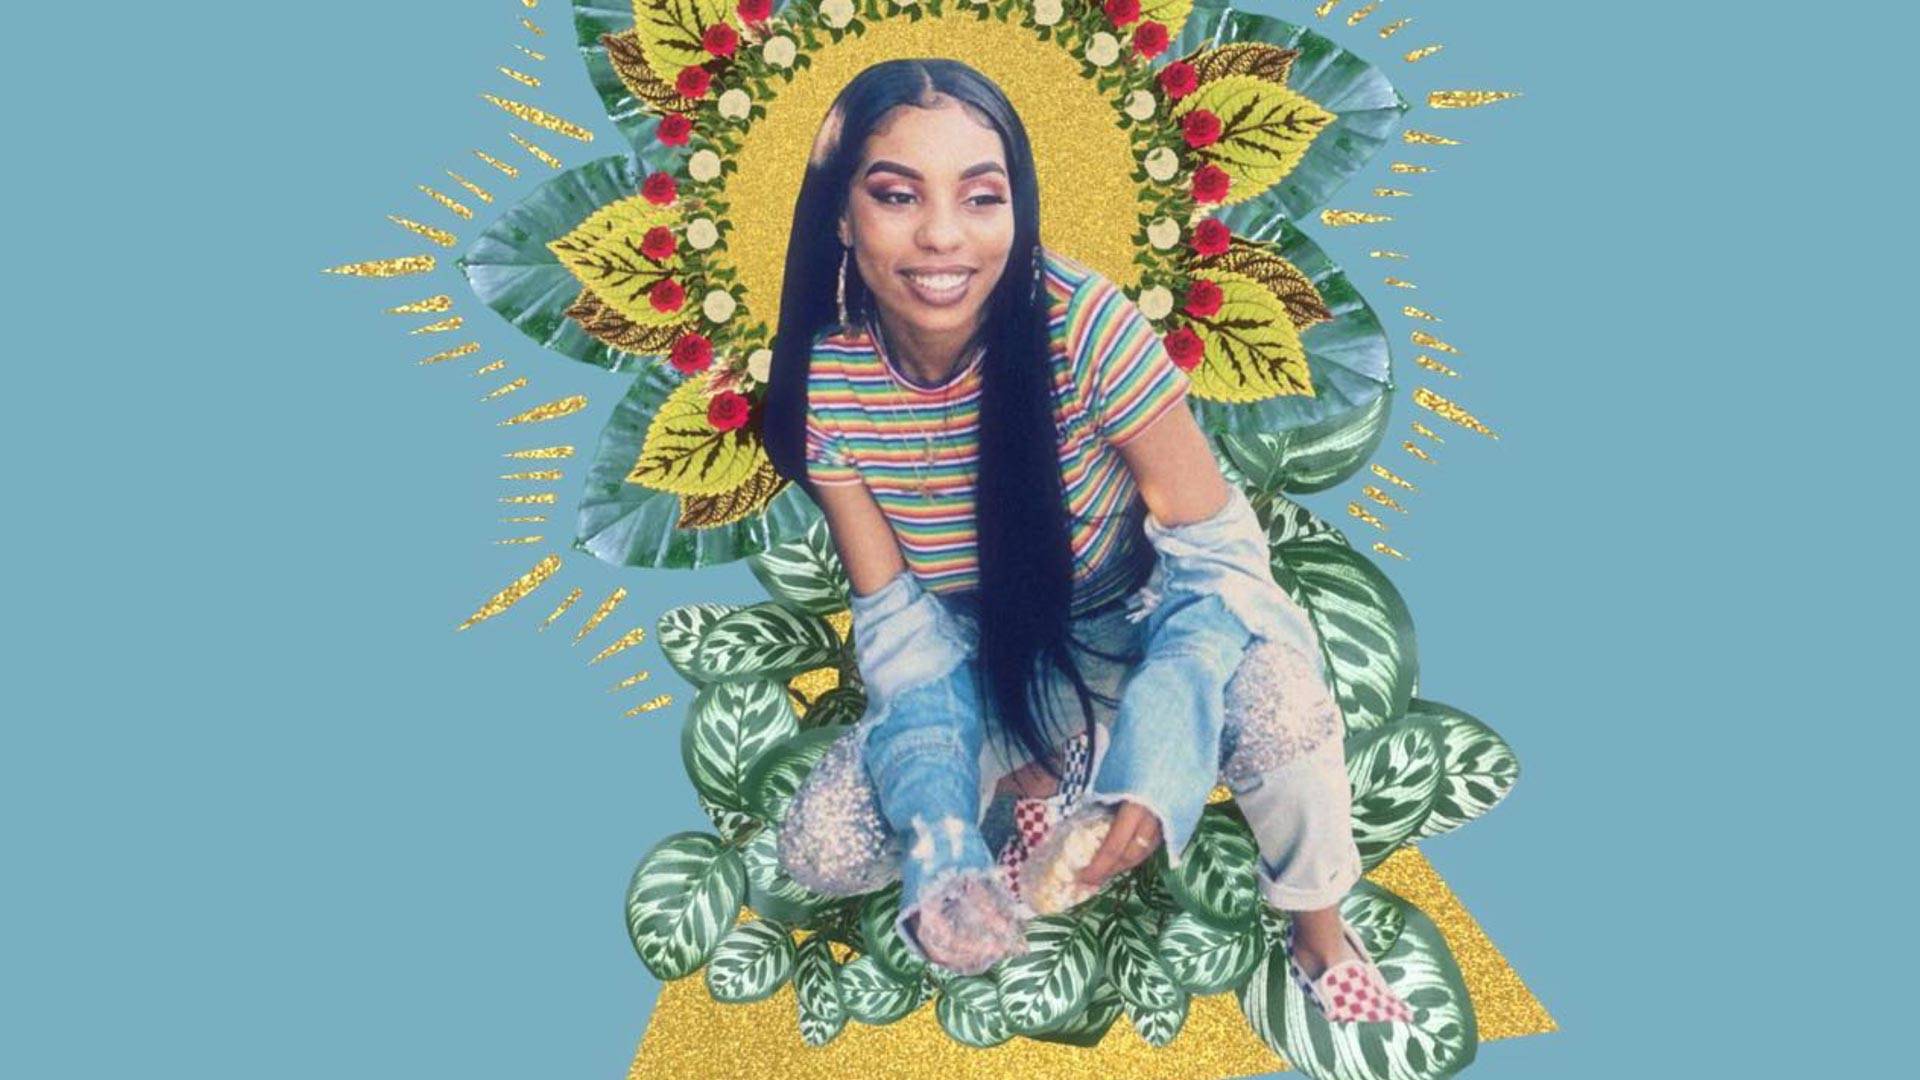 One of many tributes to Nia Wilson, who was killed Monday at MacArthur BART.  Ruben Guadalupe Marquez (IG: <a href="https://www.instagram.com/broobs.psd/?hl=en" target="_blank">@broobs.psd</a>)